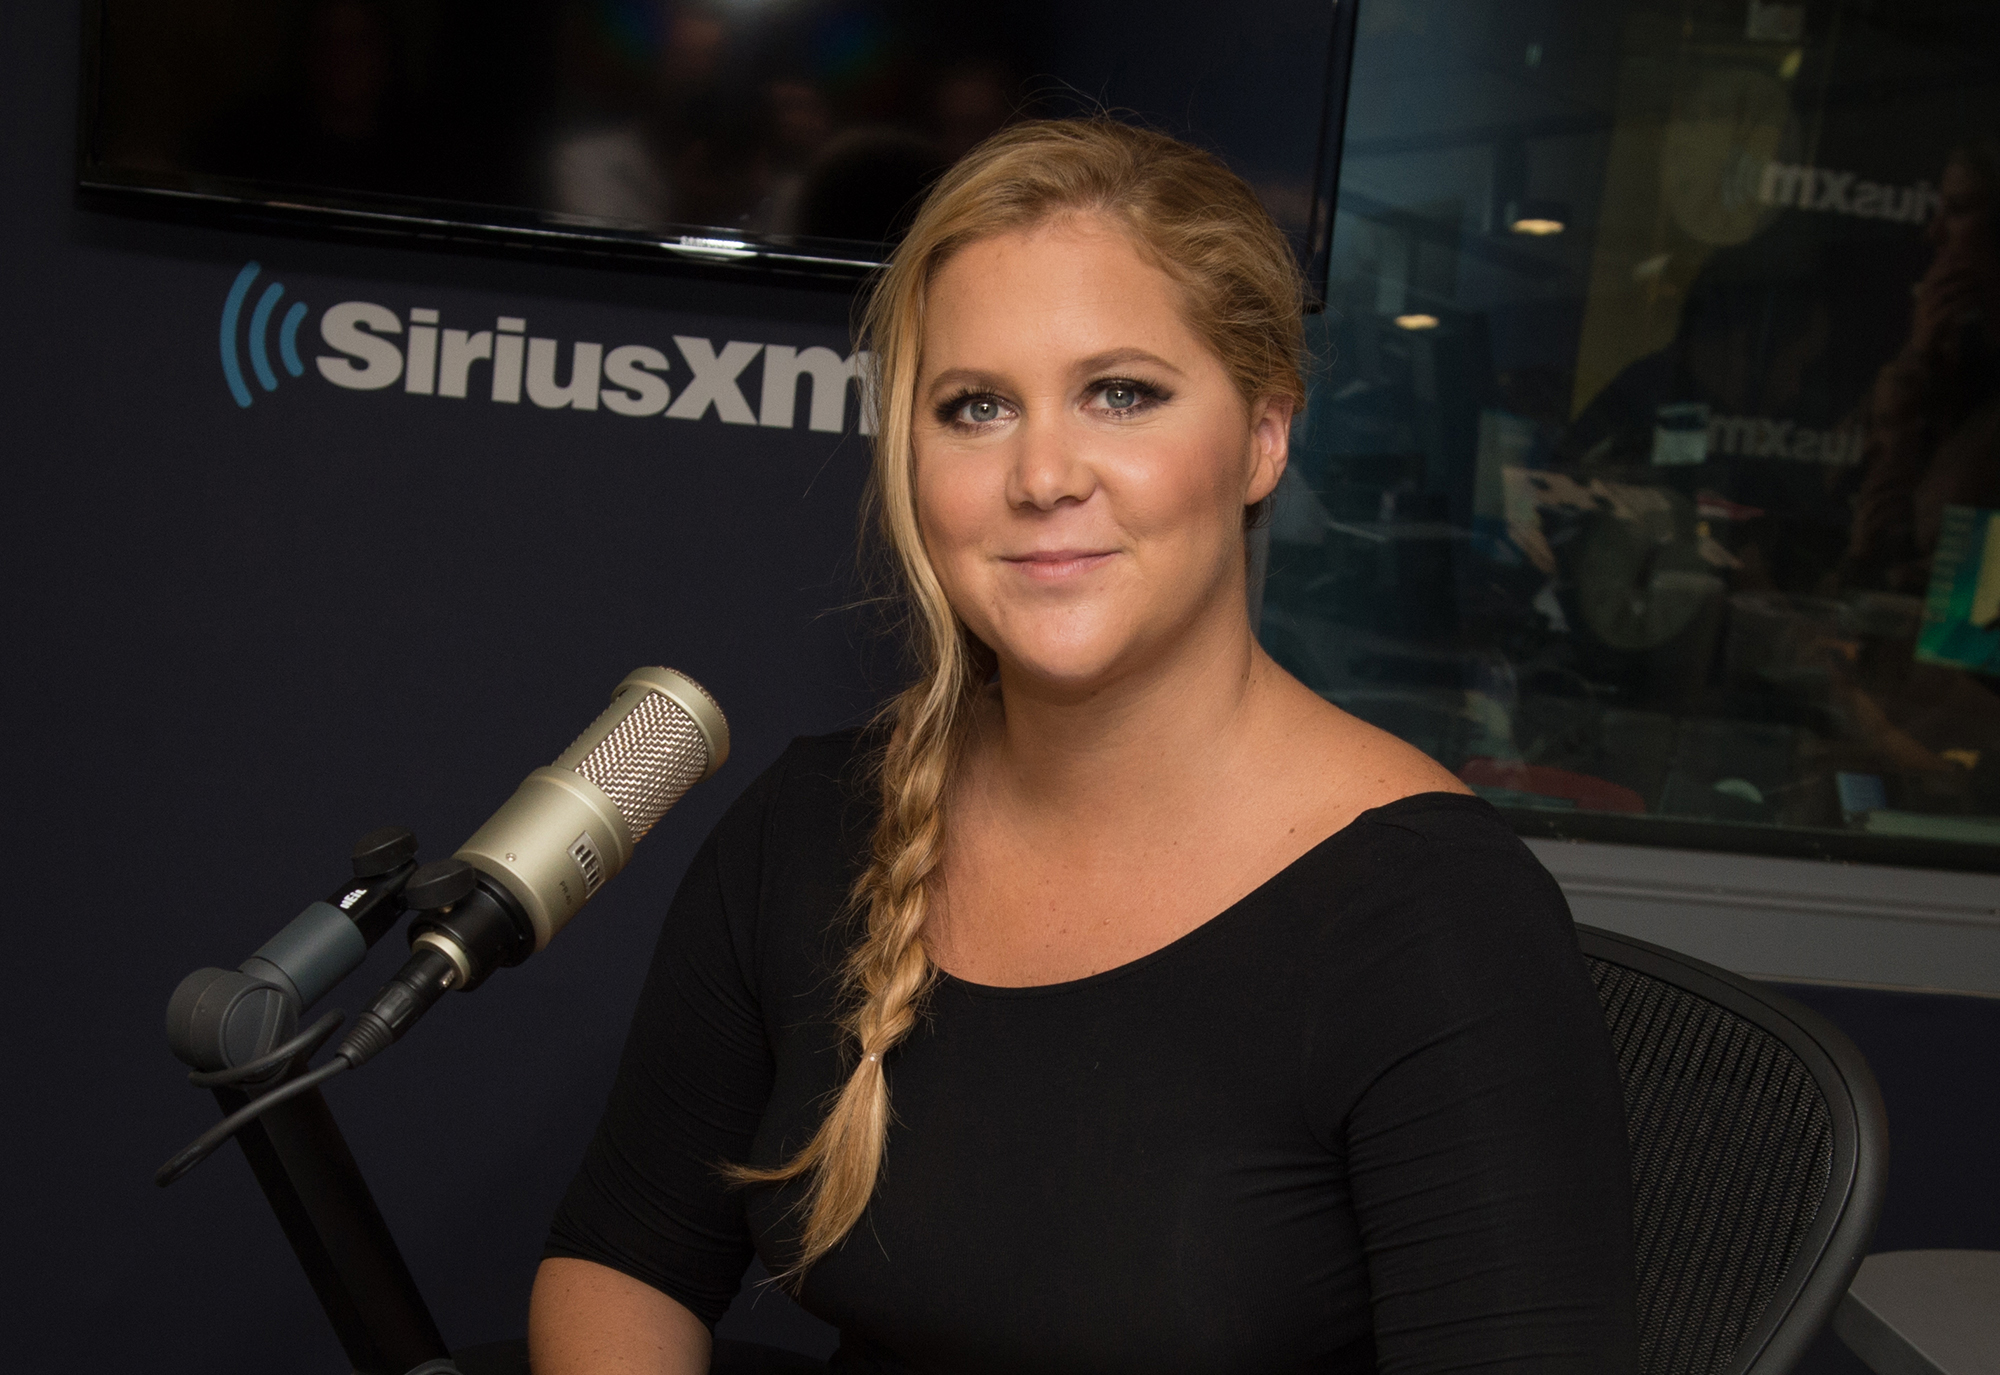 Amy Schumer visits SiriusXM at SiriusXM Studio on August 23, 2016 in New York City.  (Photo by J. Kempin/Getty Images) (J. Kempin&mdash;Getty Images)